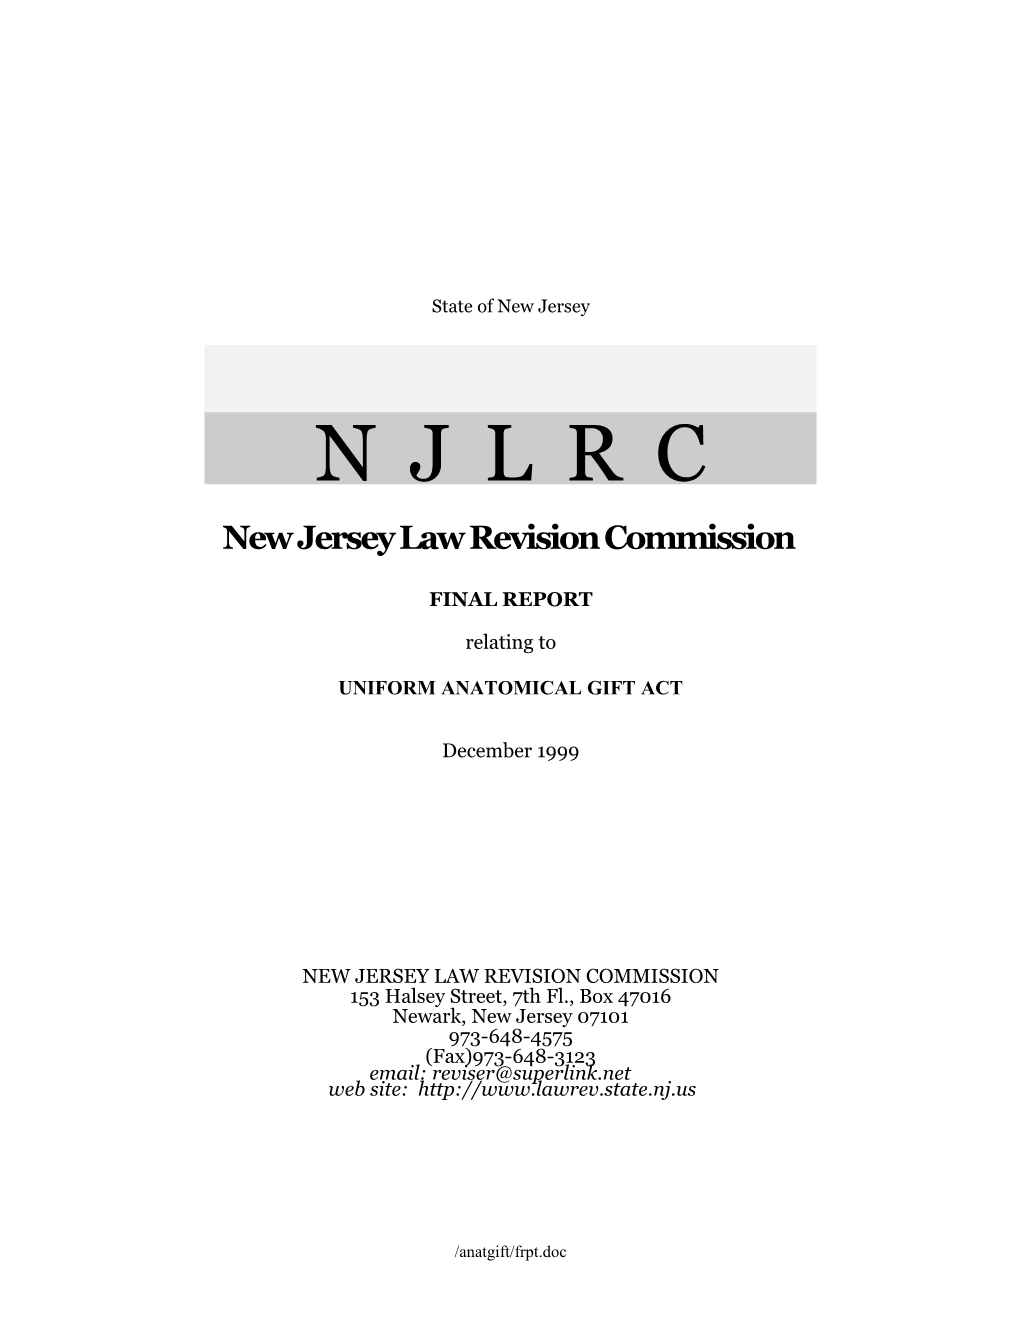 New Jersey Law Revision Commission